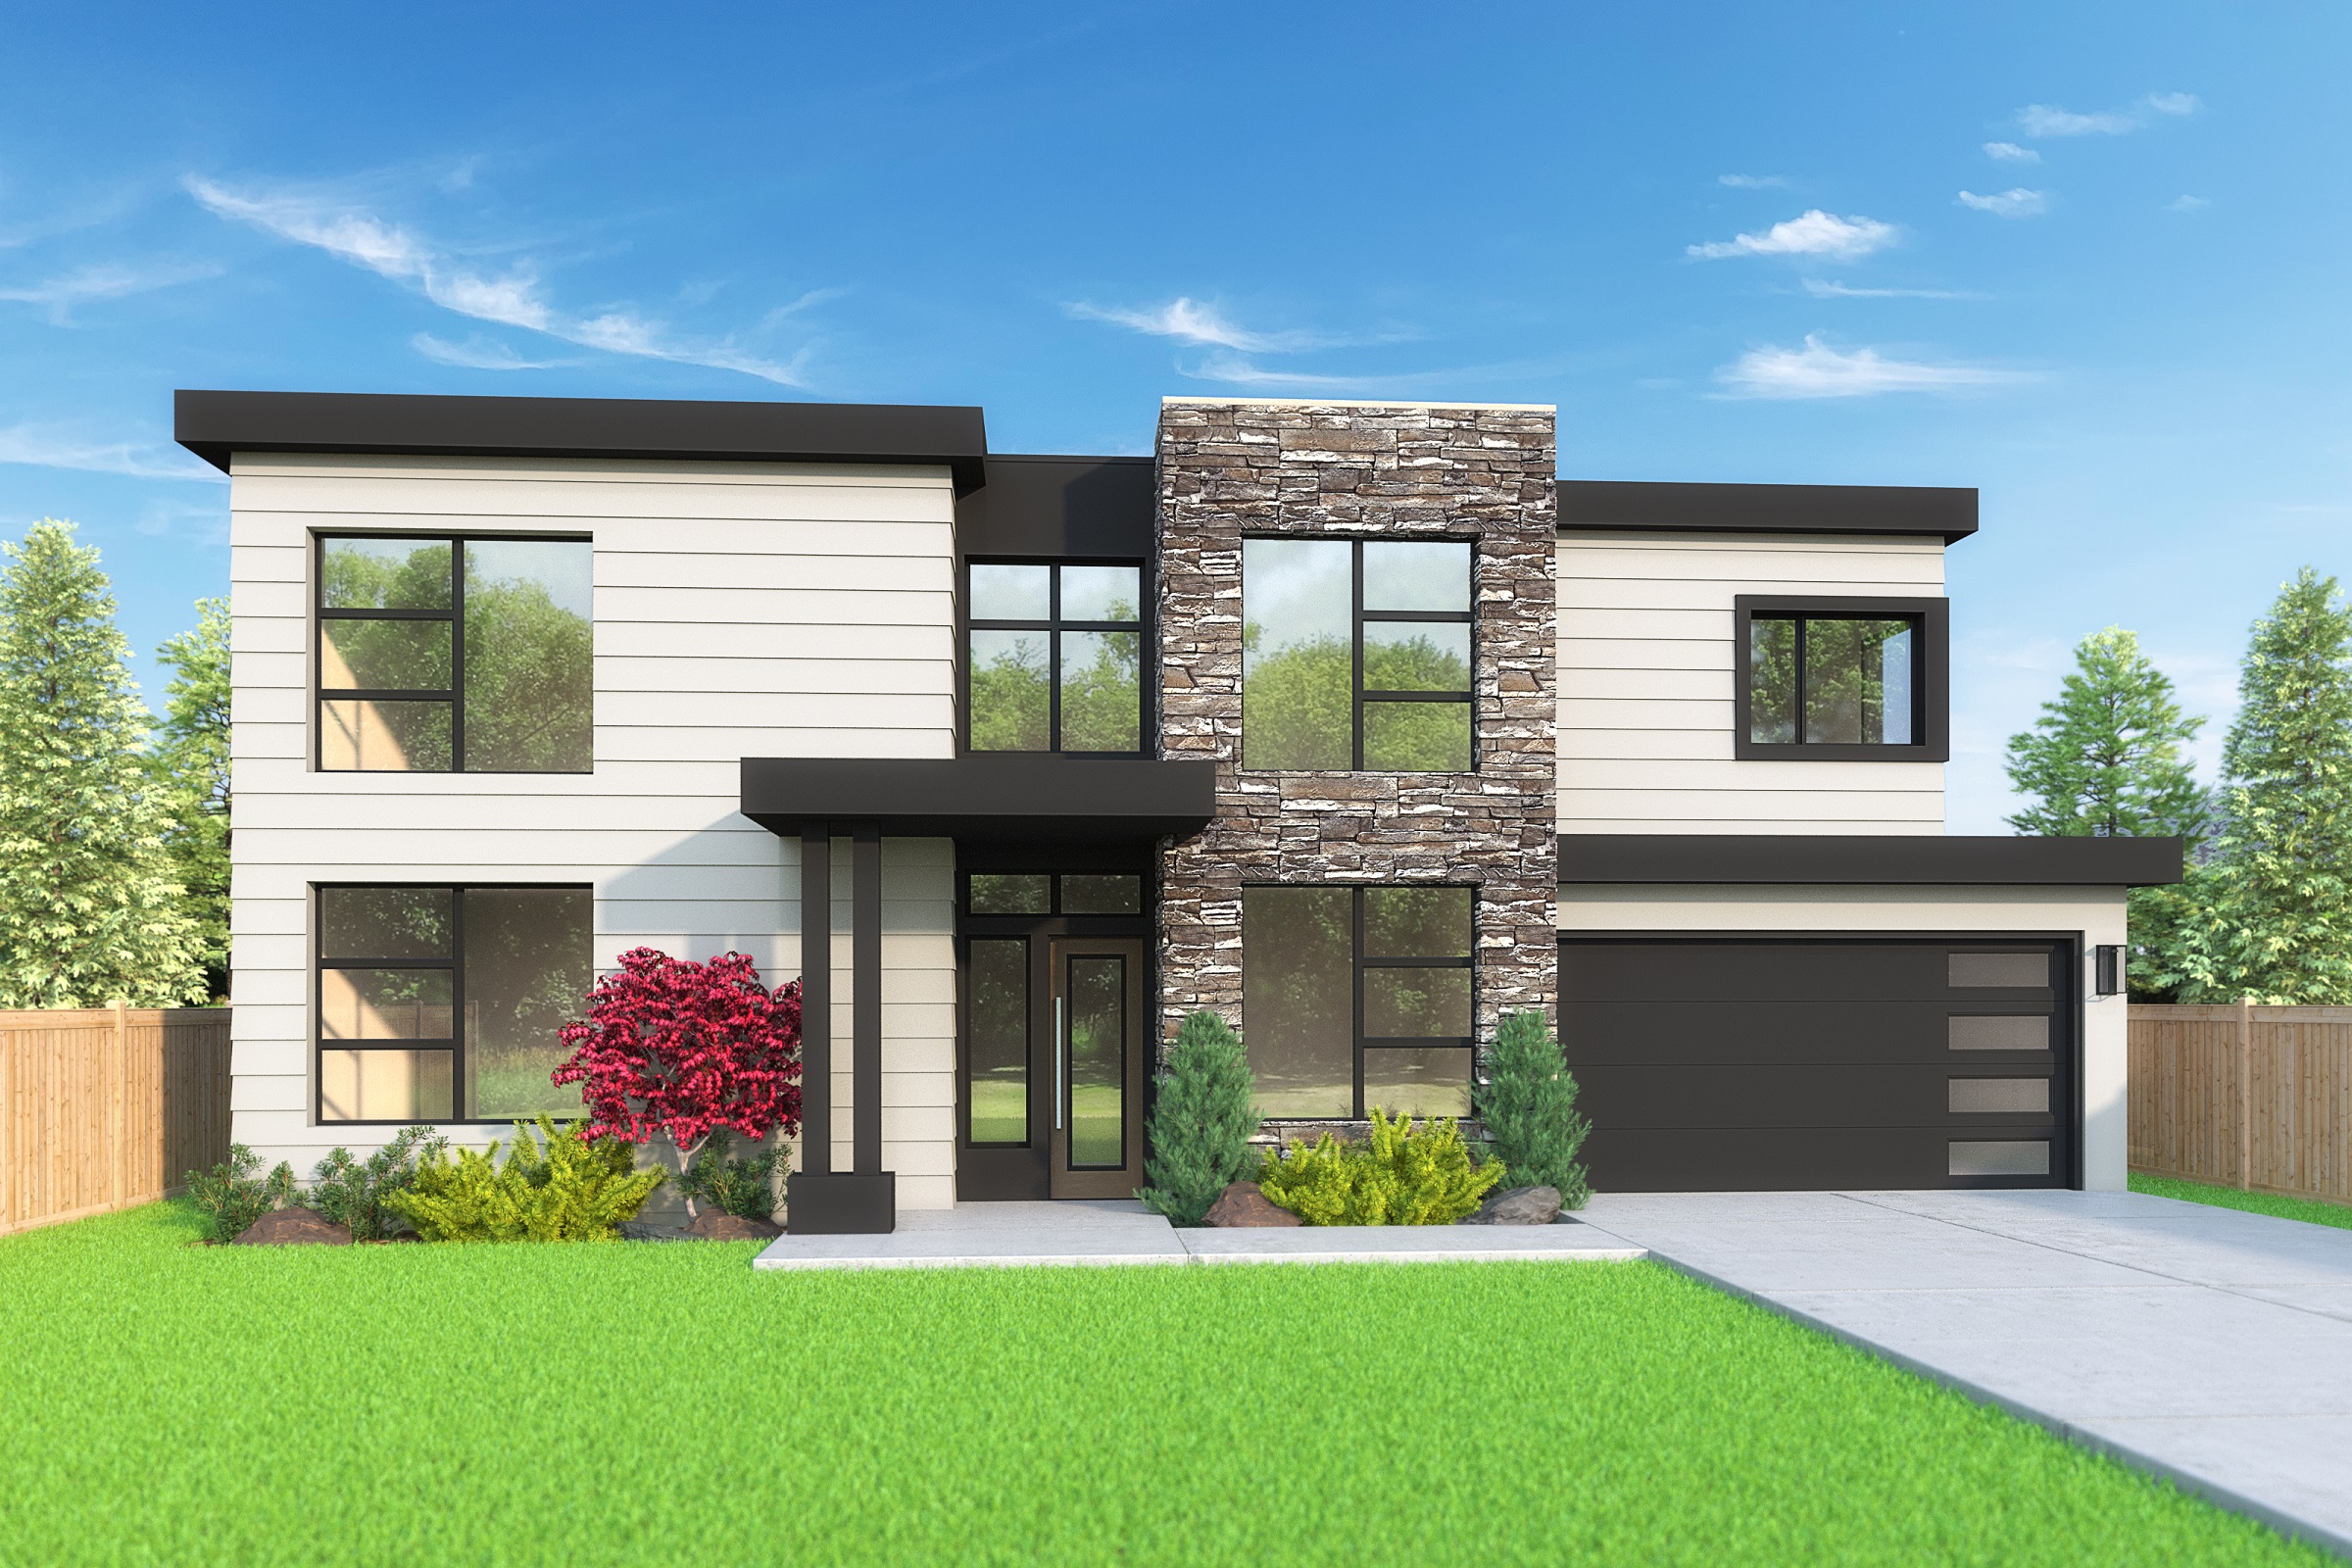 View our new luxury home construction on 730 18th Ave W, in Kirkland, WA from MN Custom Homes